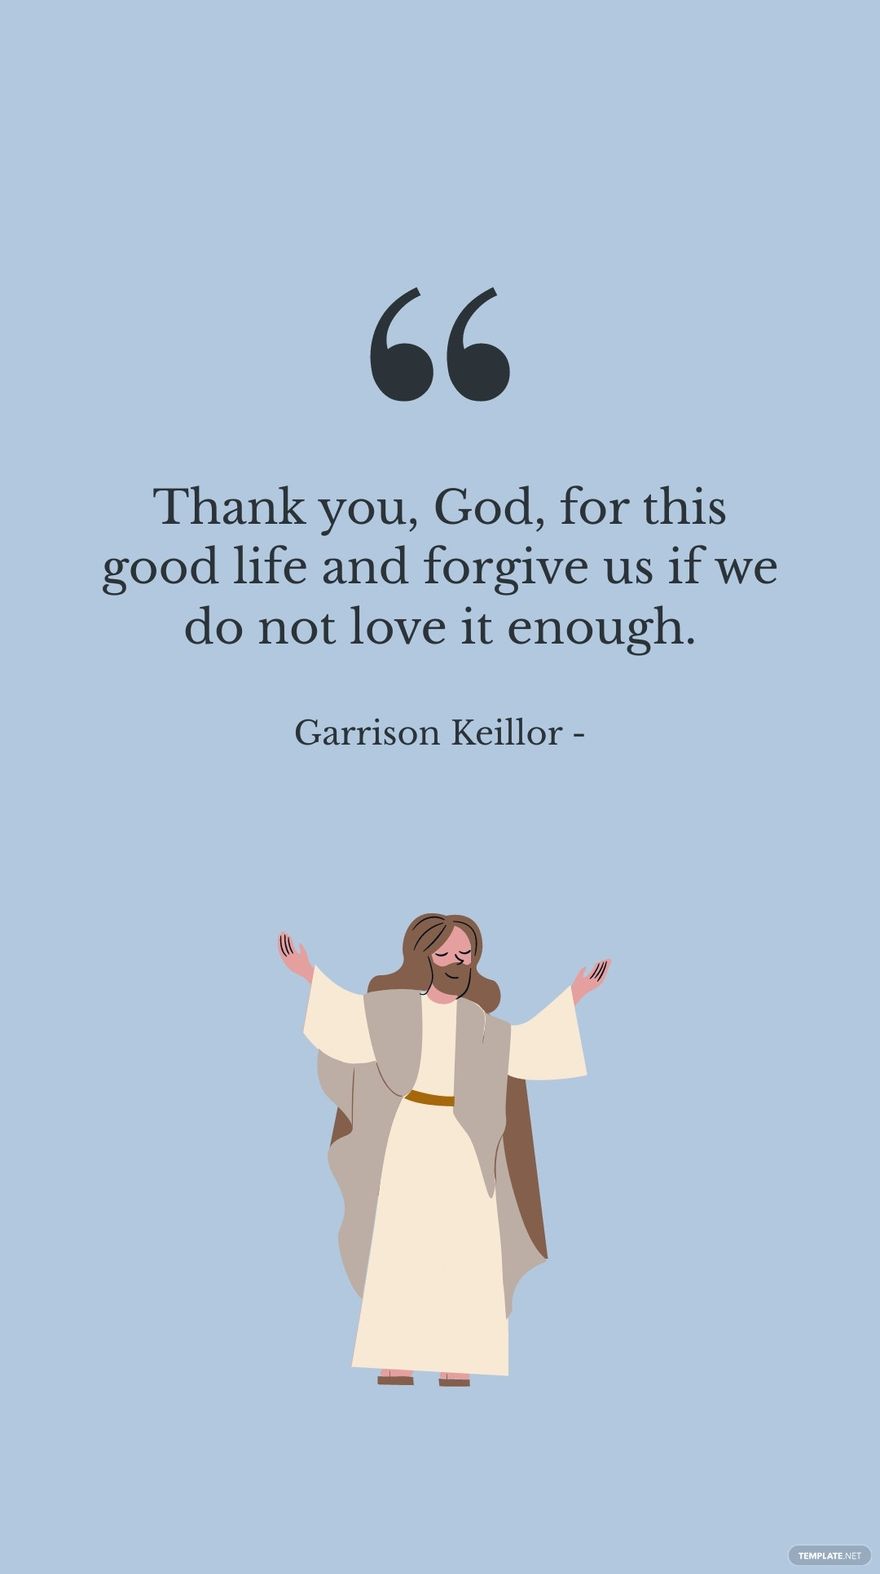 Free Garrison Keillor - Thank you, God, for this good life and forgive us if we do not love it enough. in JPG